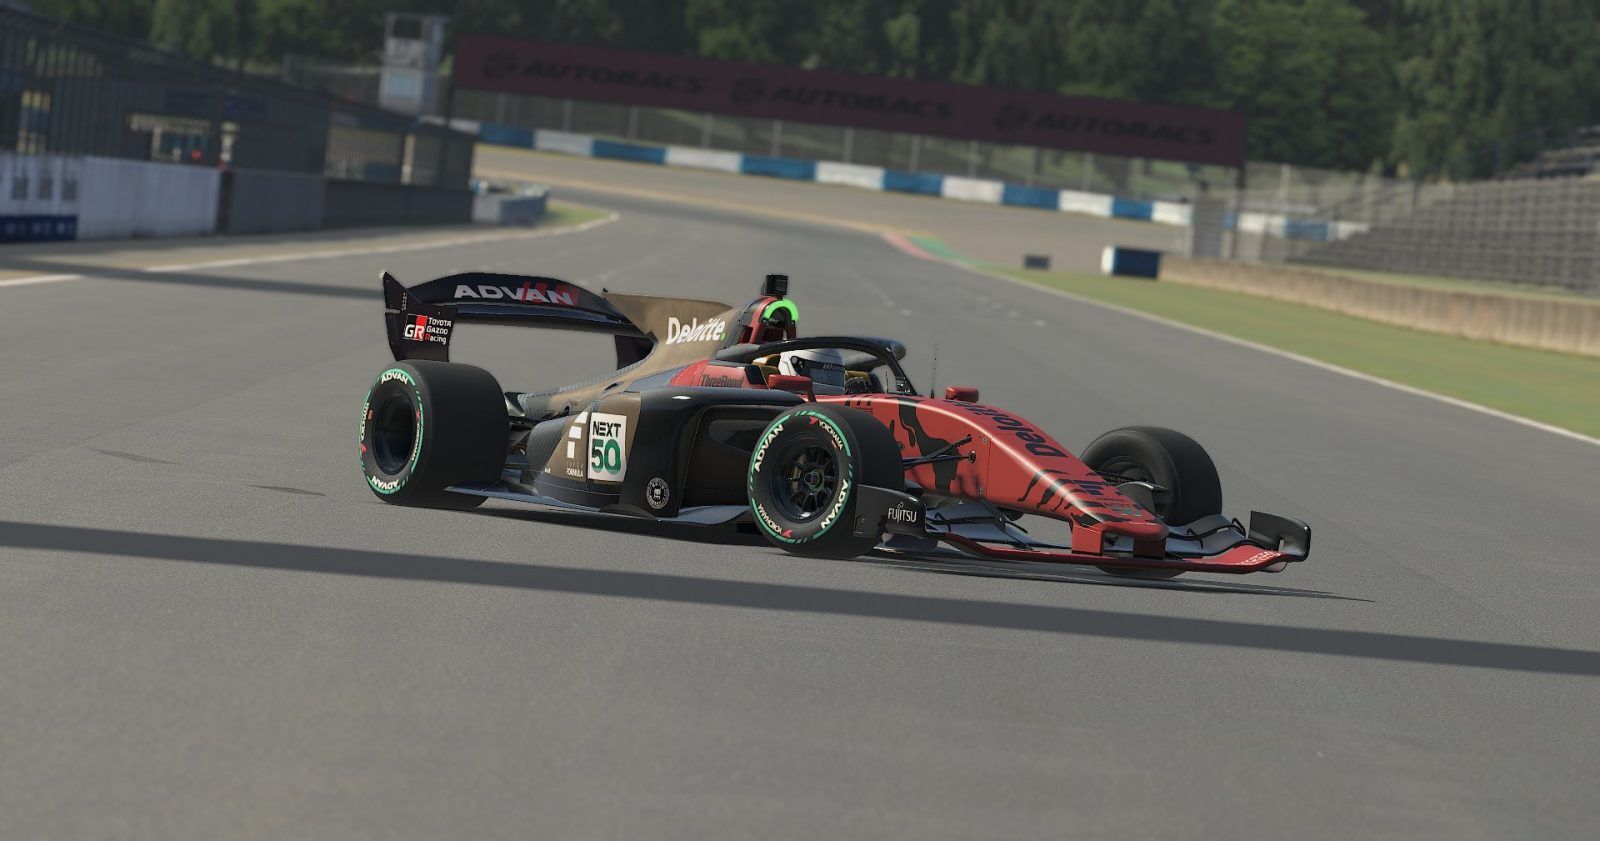 Super Formula car among the content affected by the latest iRacing Season 4 patch